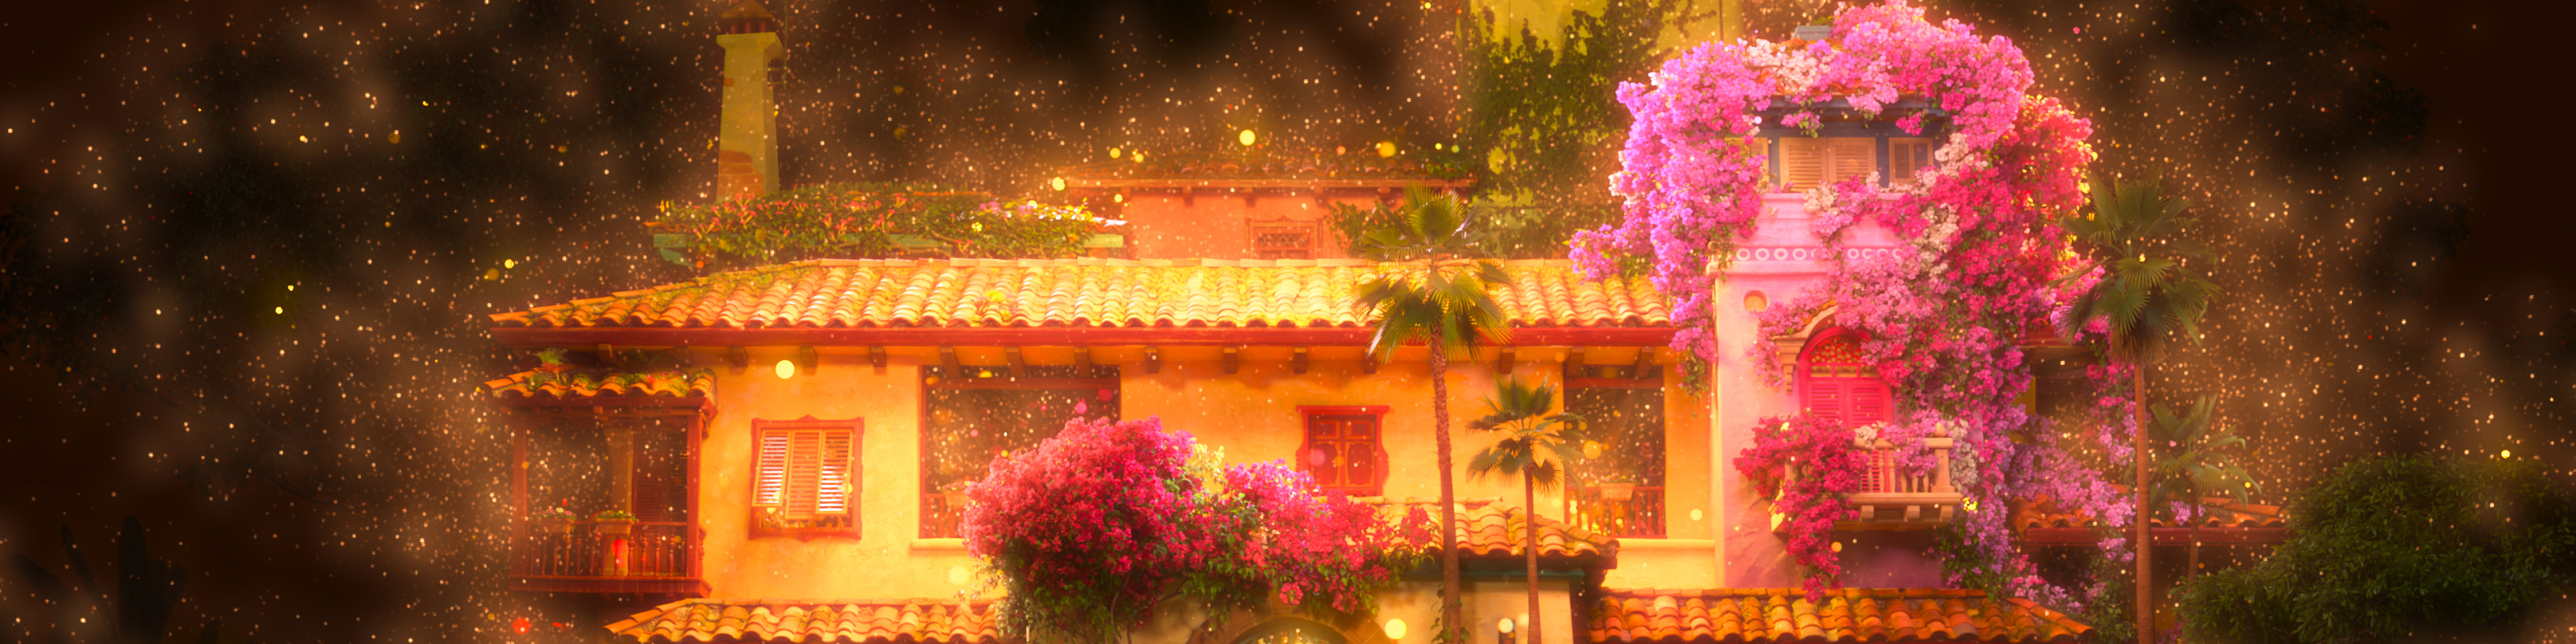 The Madrigal’s casita in “Encanto” - a screenshot from the animated film